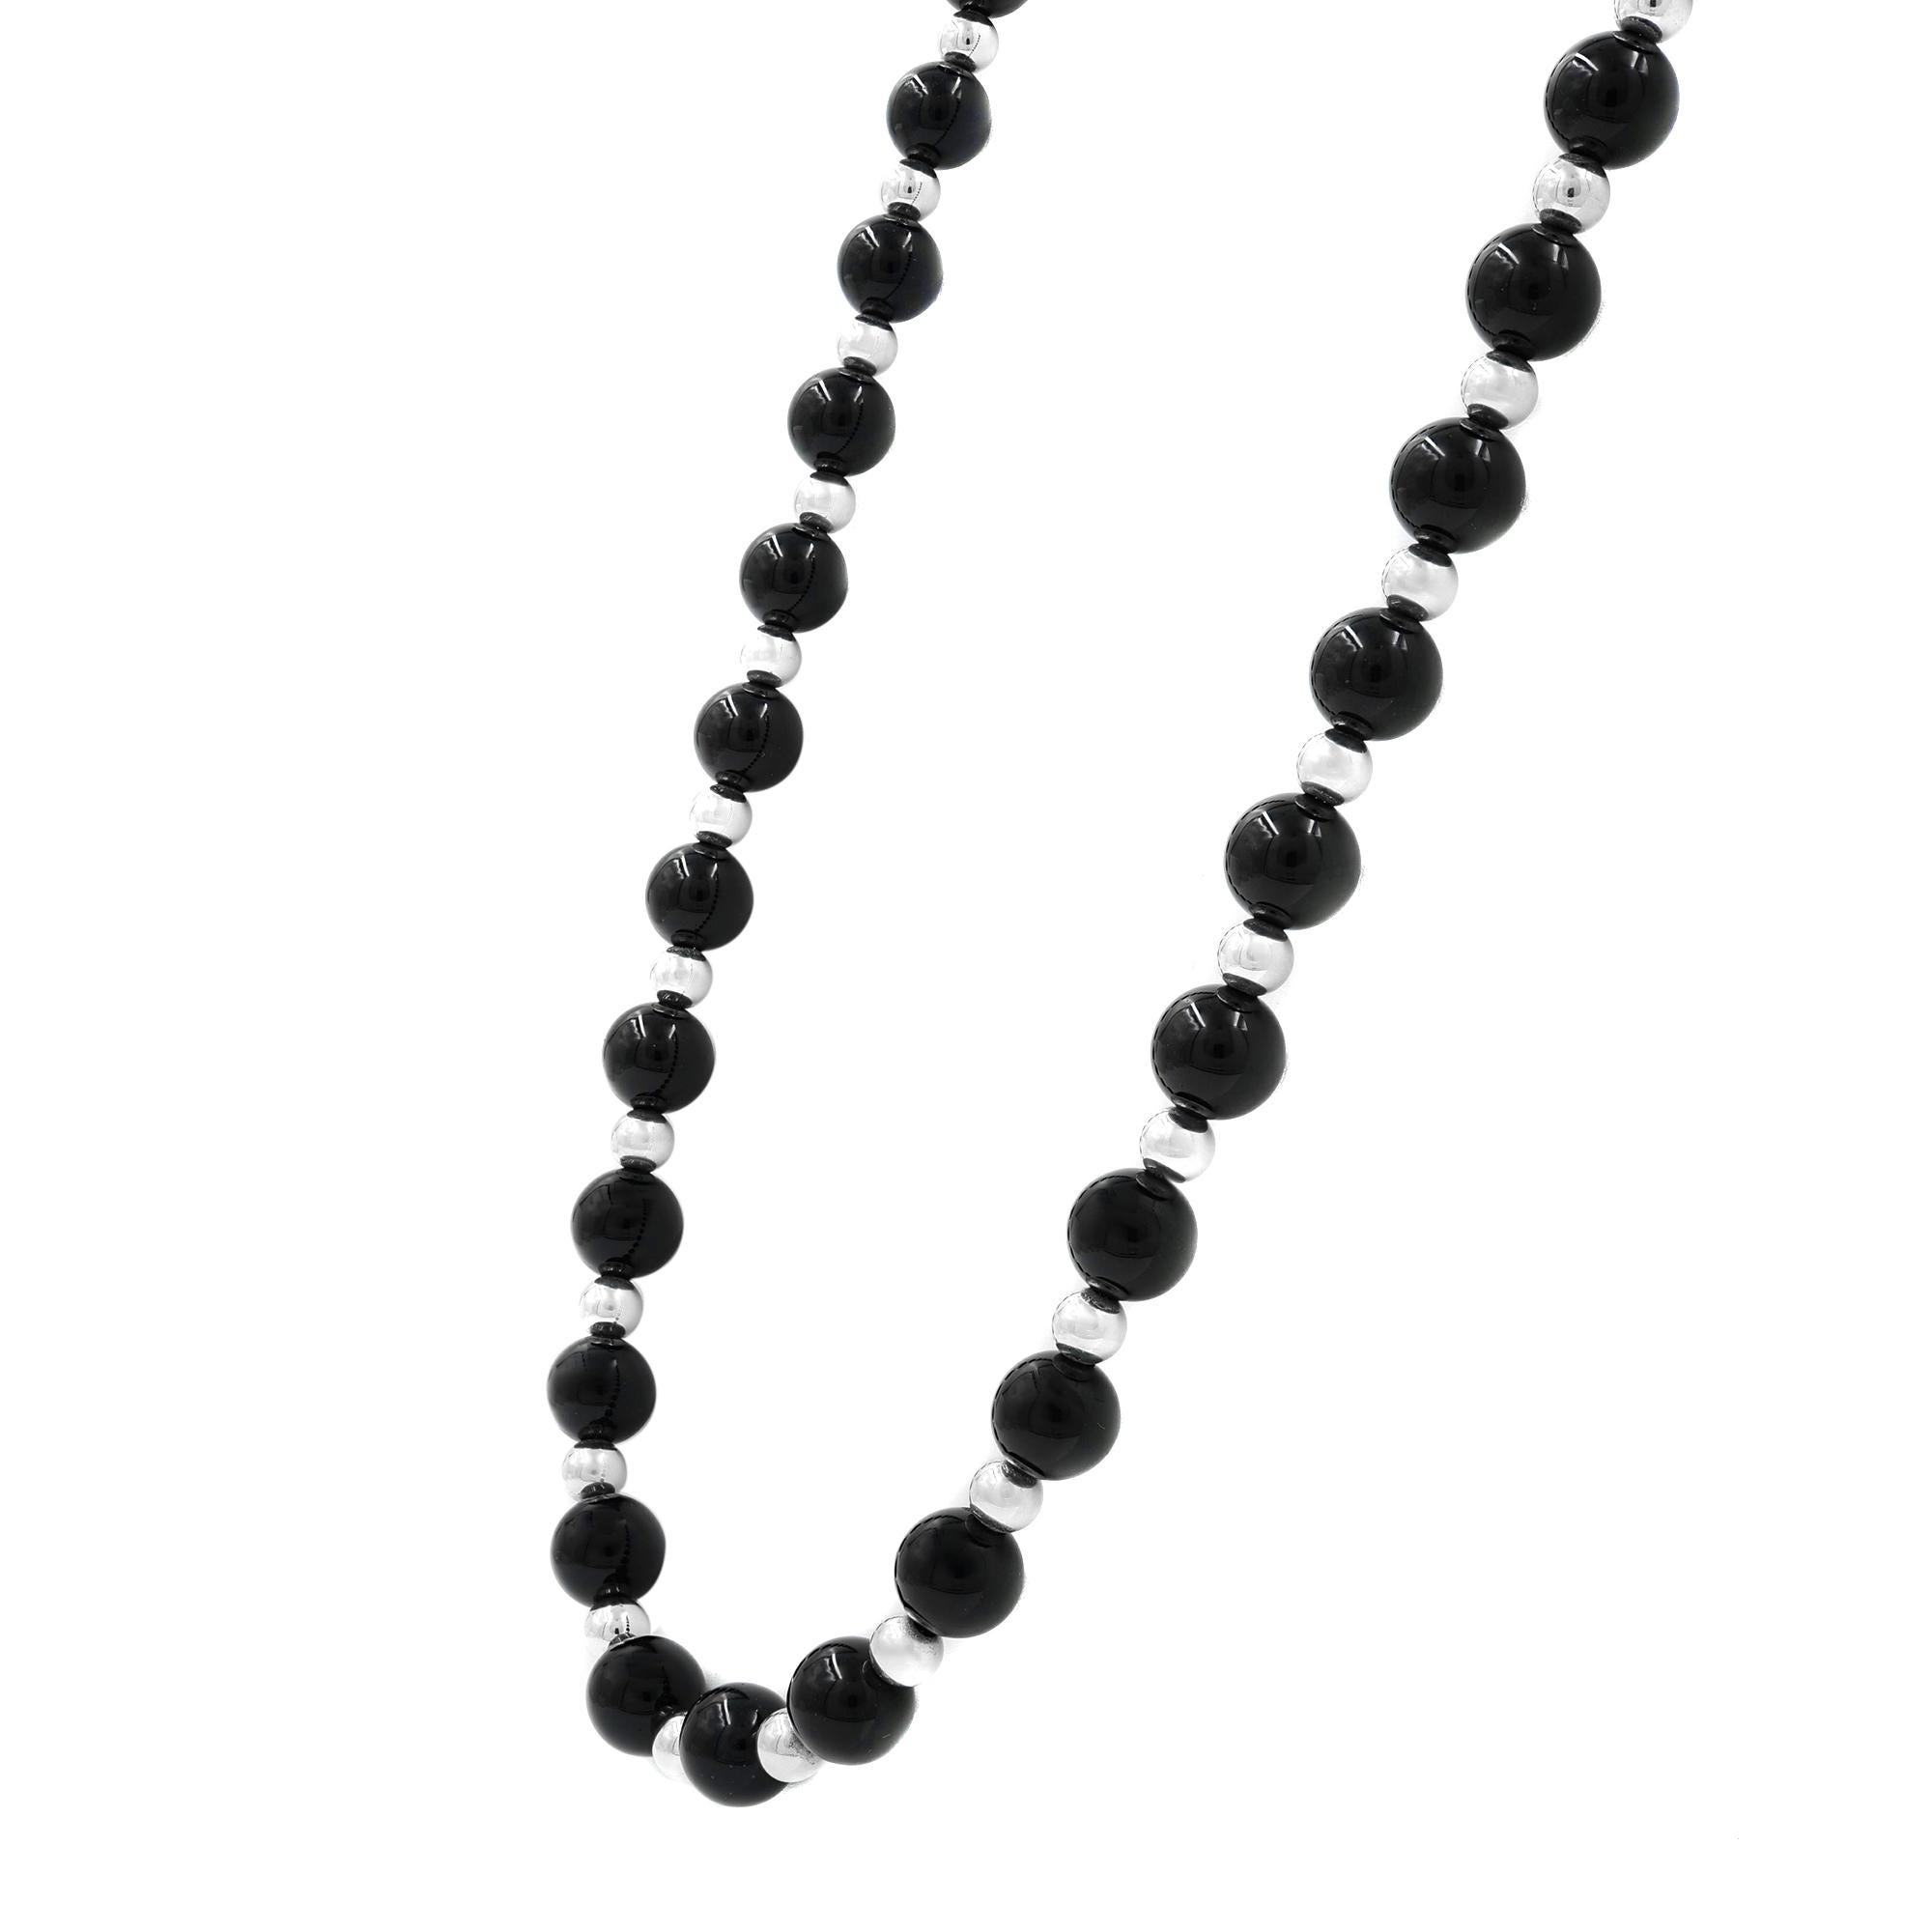 Tiffany & Co Vintage Sterling Silver & Black Onyx 31 Inch Single Strand Necklace. This stunning necklace has a small round tag that is engraved with the old Tiffany hallmark: T & CO STERLING. It weighs 50.9 grams. The large onyx beads measure 8.3 mm